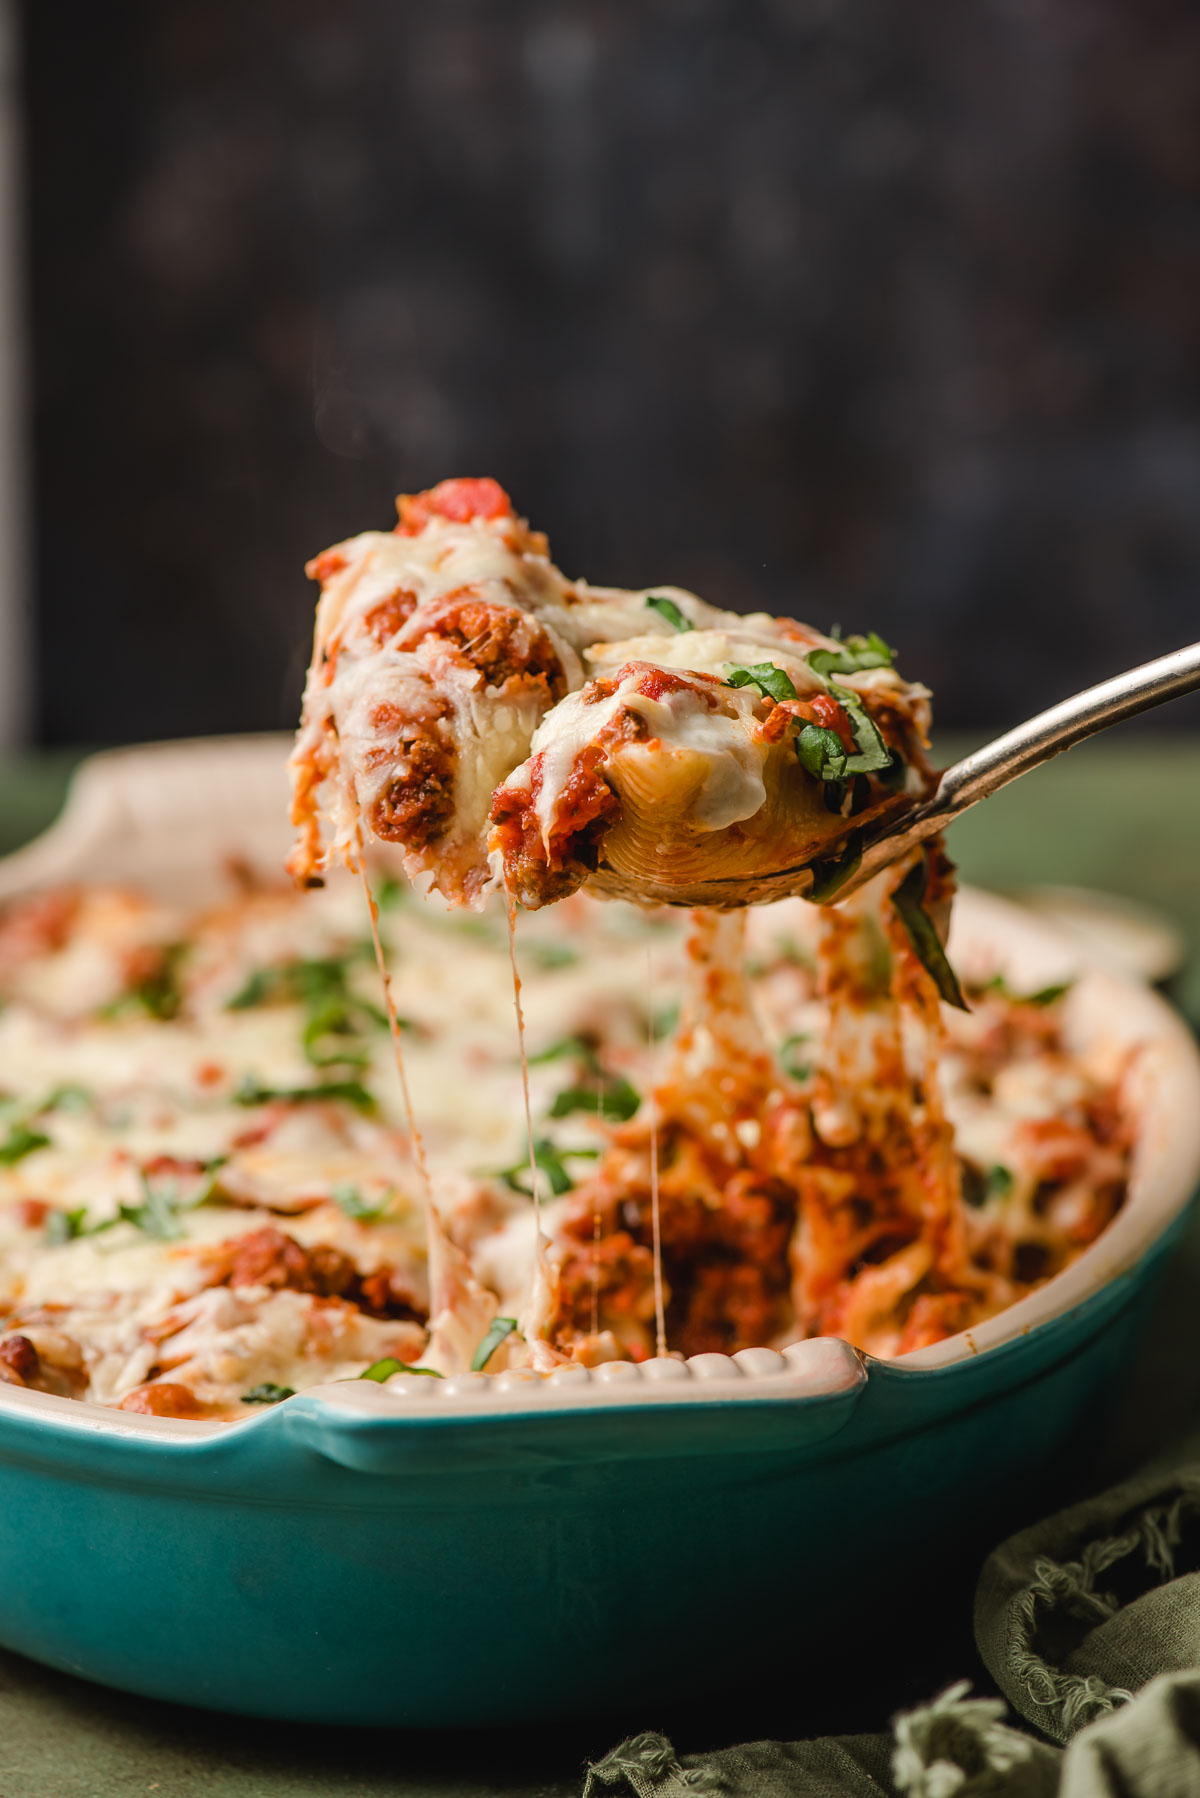 Melted cheese stretches from a scoop of stuffed shells with ground beef.